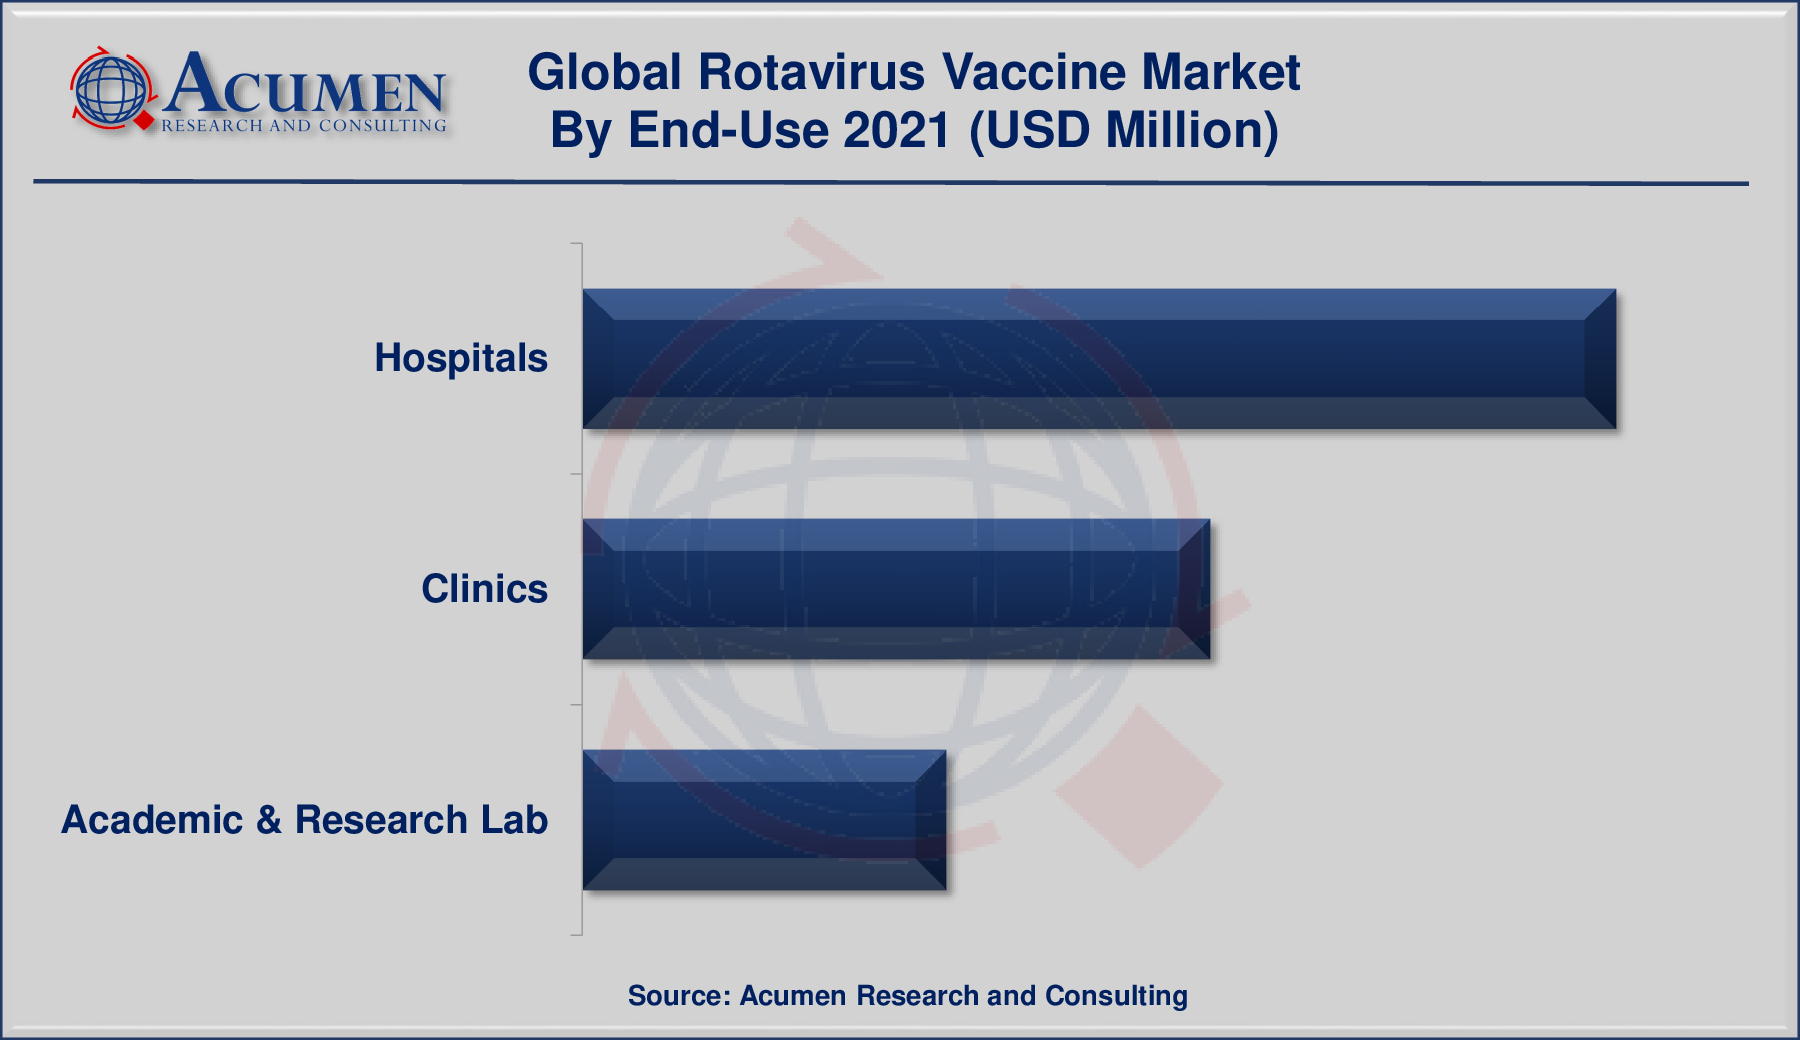 Rotavirus Vaccine Market By End-Use is predicted to be worth USD 22,750 Million by 2030, with a CAGR of 11%